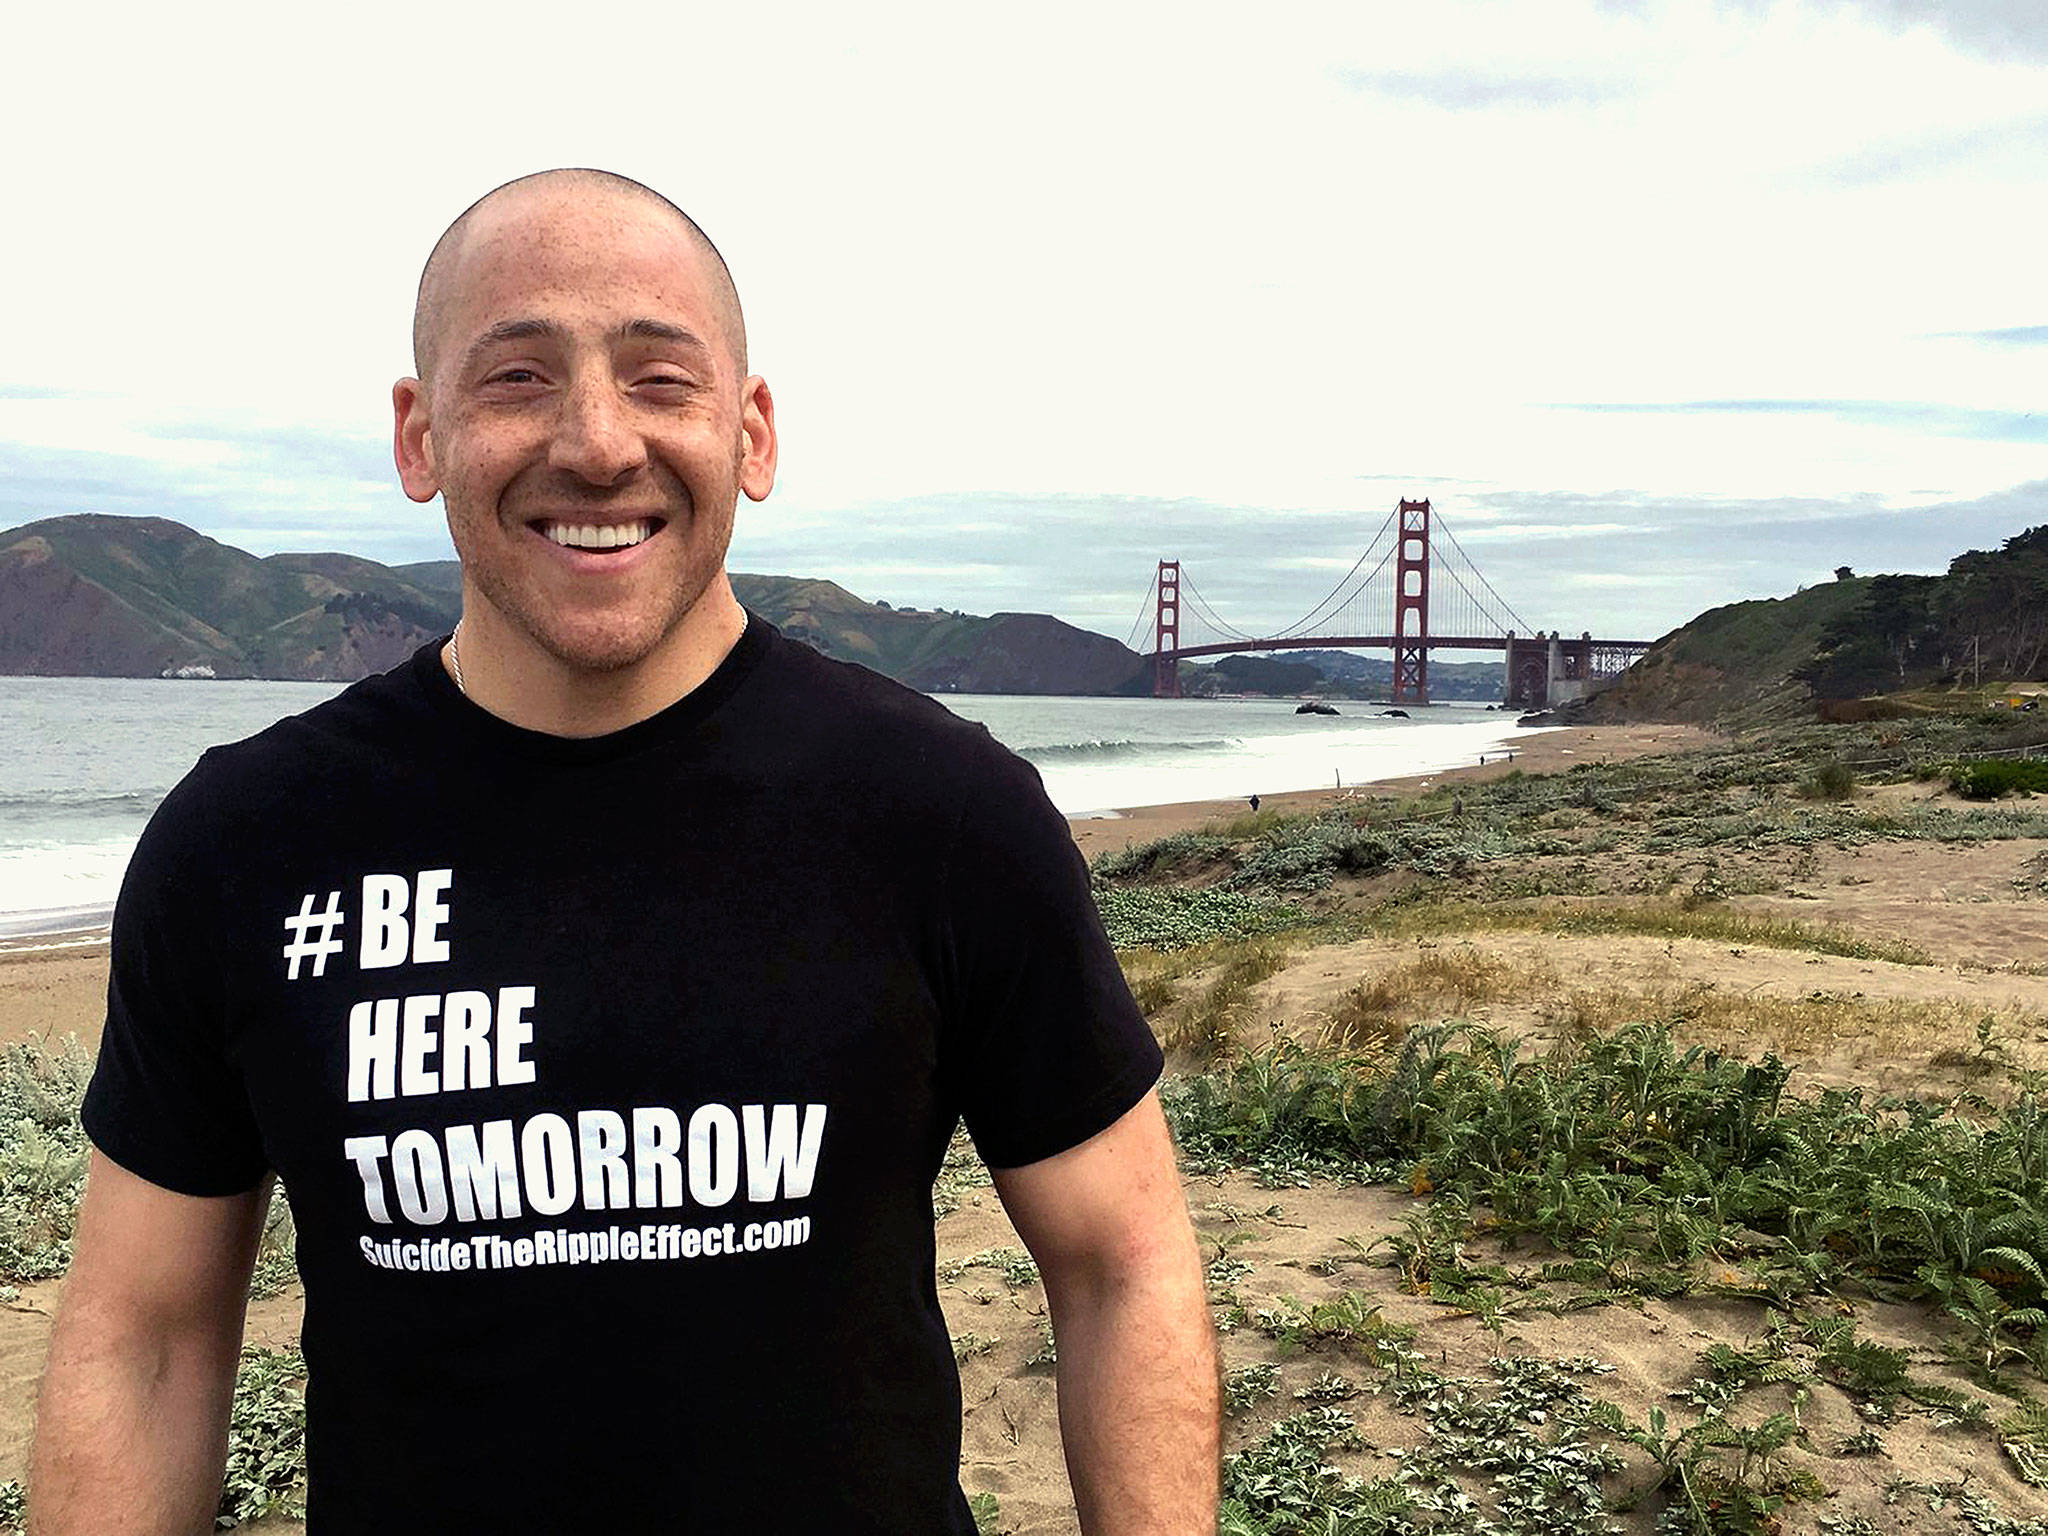 Of nearly 2,000 who have committed suicide by jumping from the Golden Gate Bridge, Kevin Hines is one of only about 30 who survived. (Photo courtesy Kevin Hines)